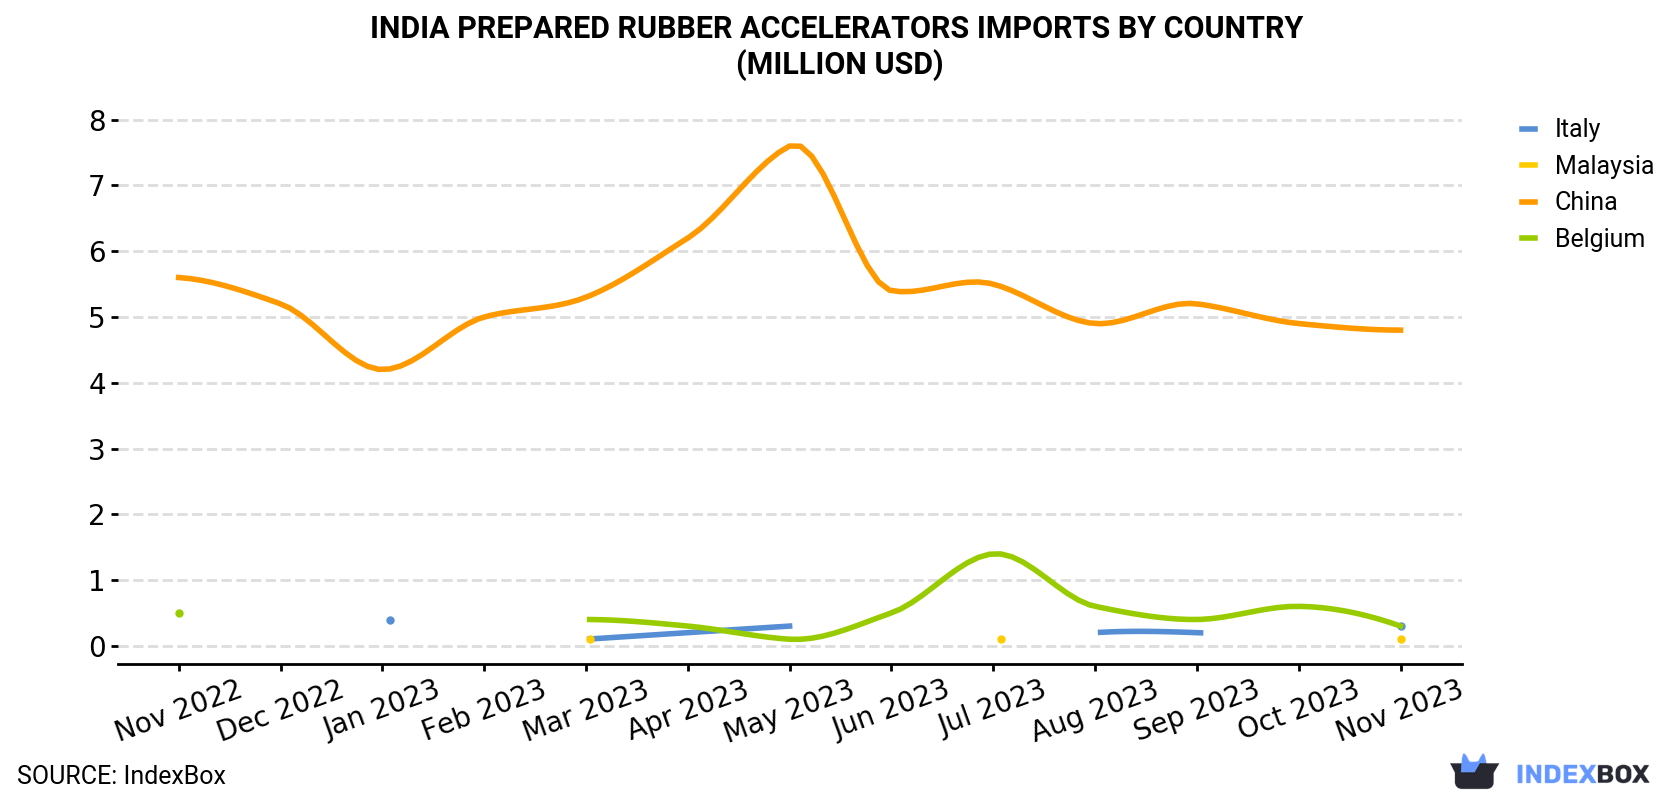 India Prepared Rubber Accelerators Imports By Country (Million USD)